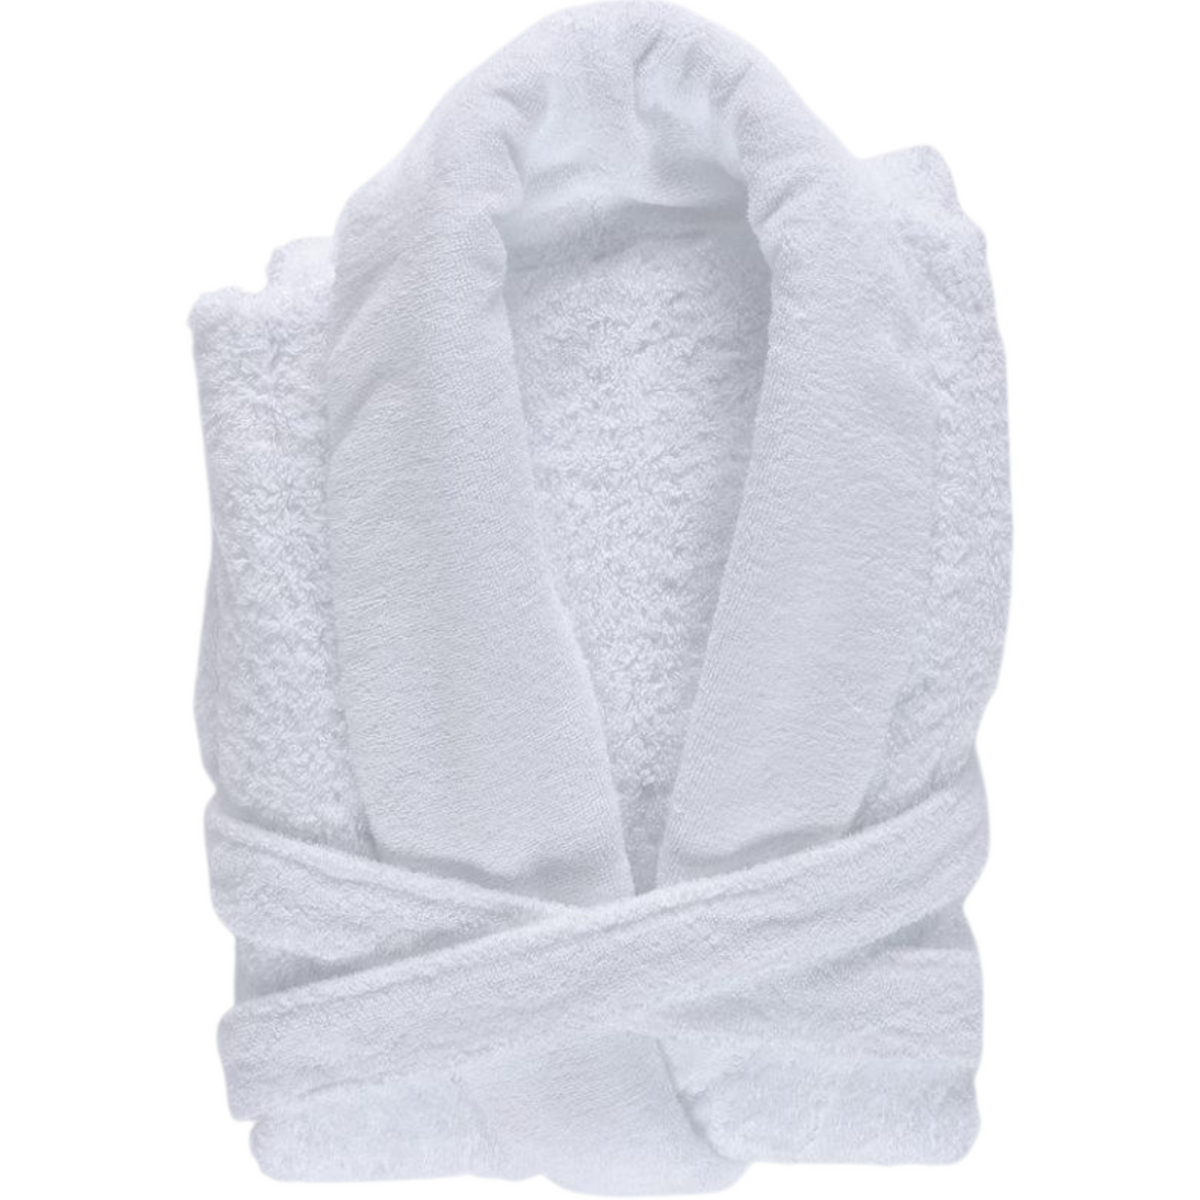 Abyss Super Pile Bath Robes Folded White Fine Linens